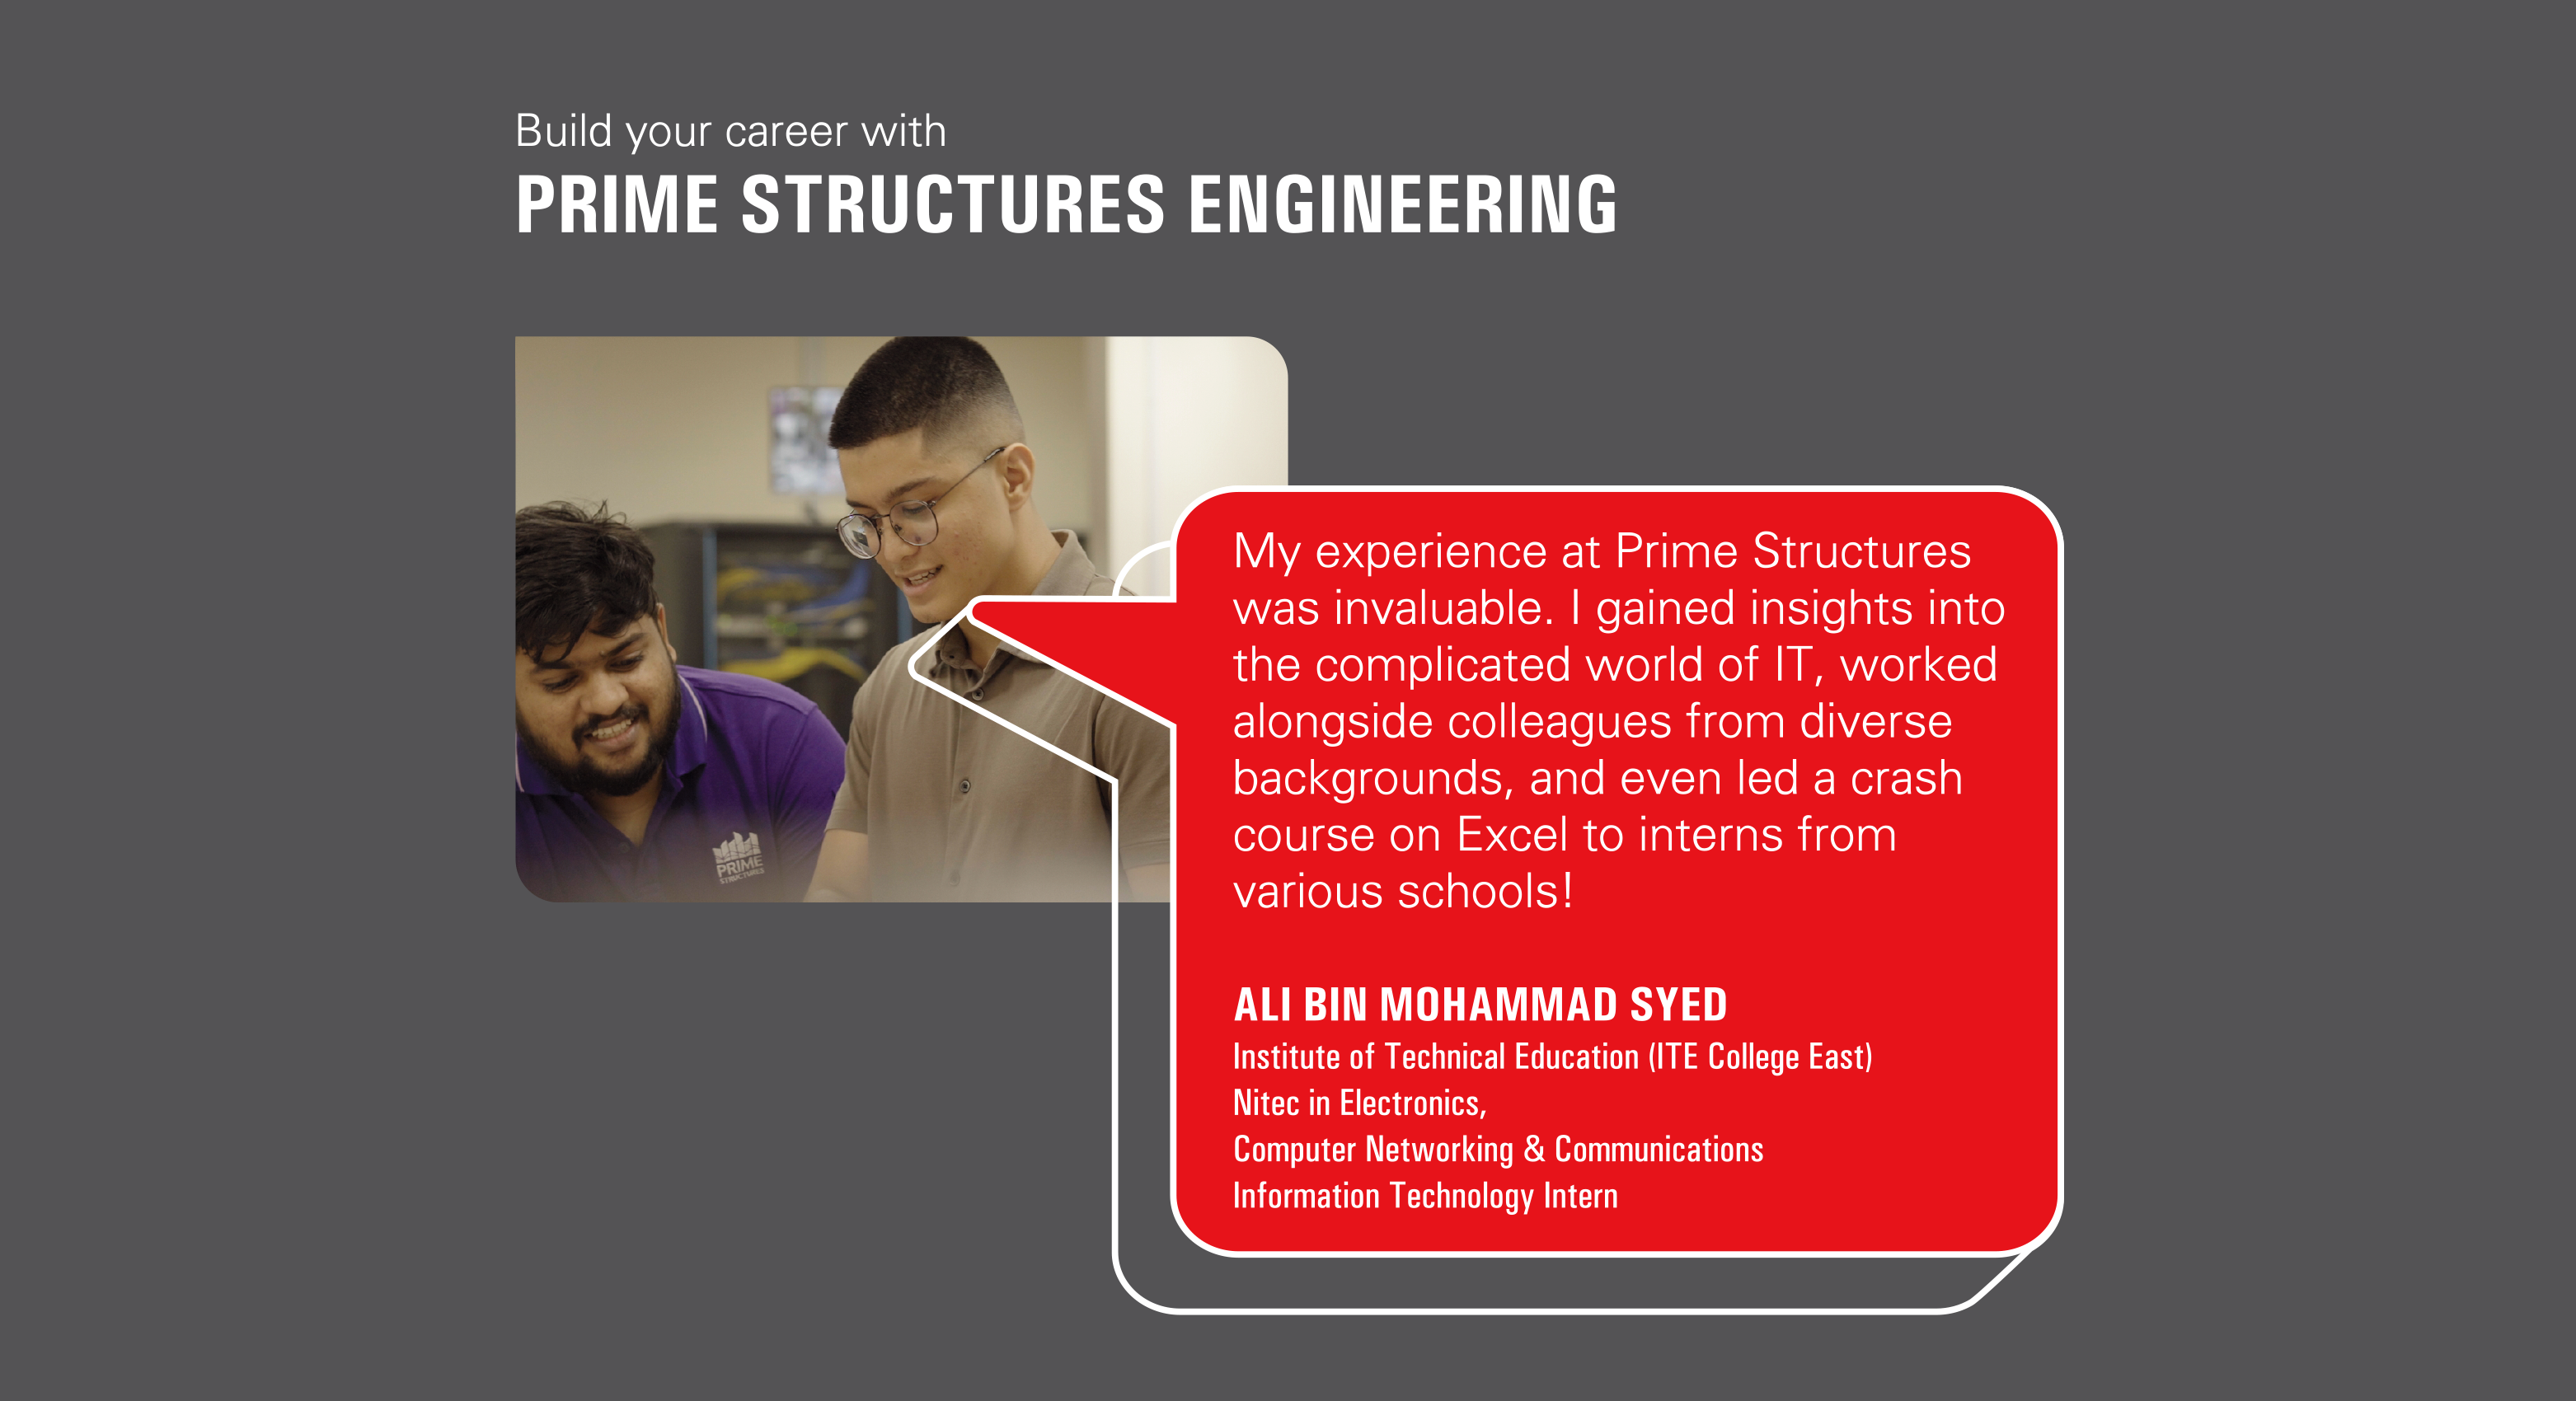 Prime Structures Engineering